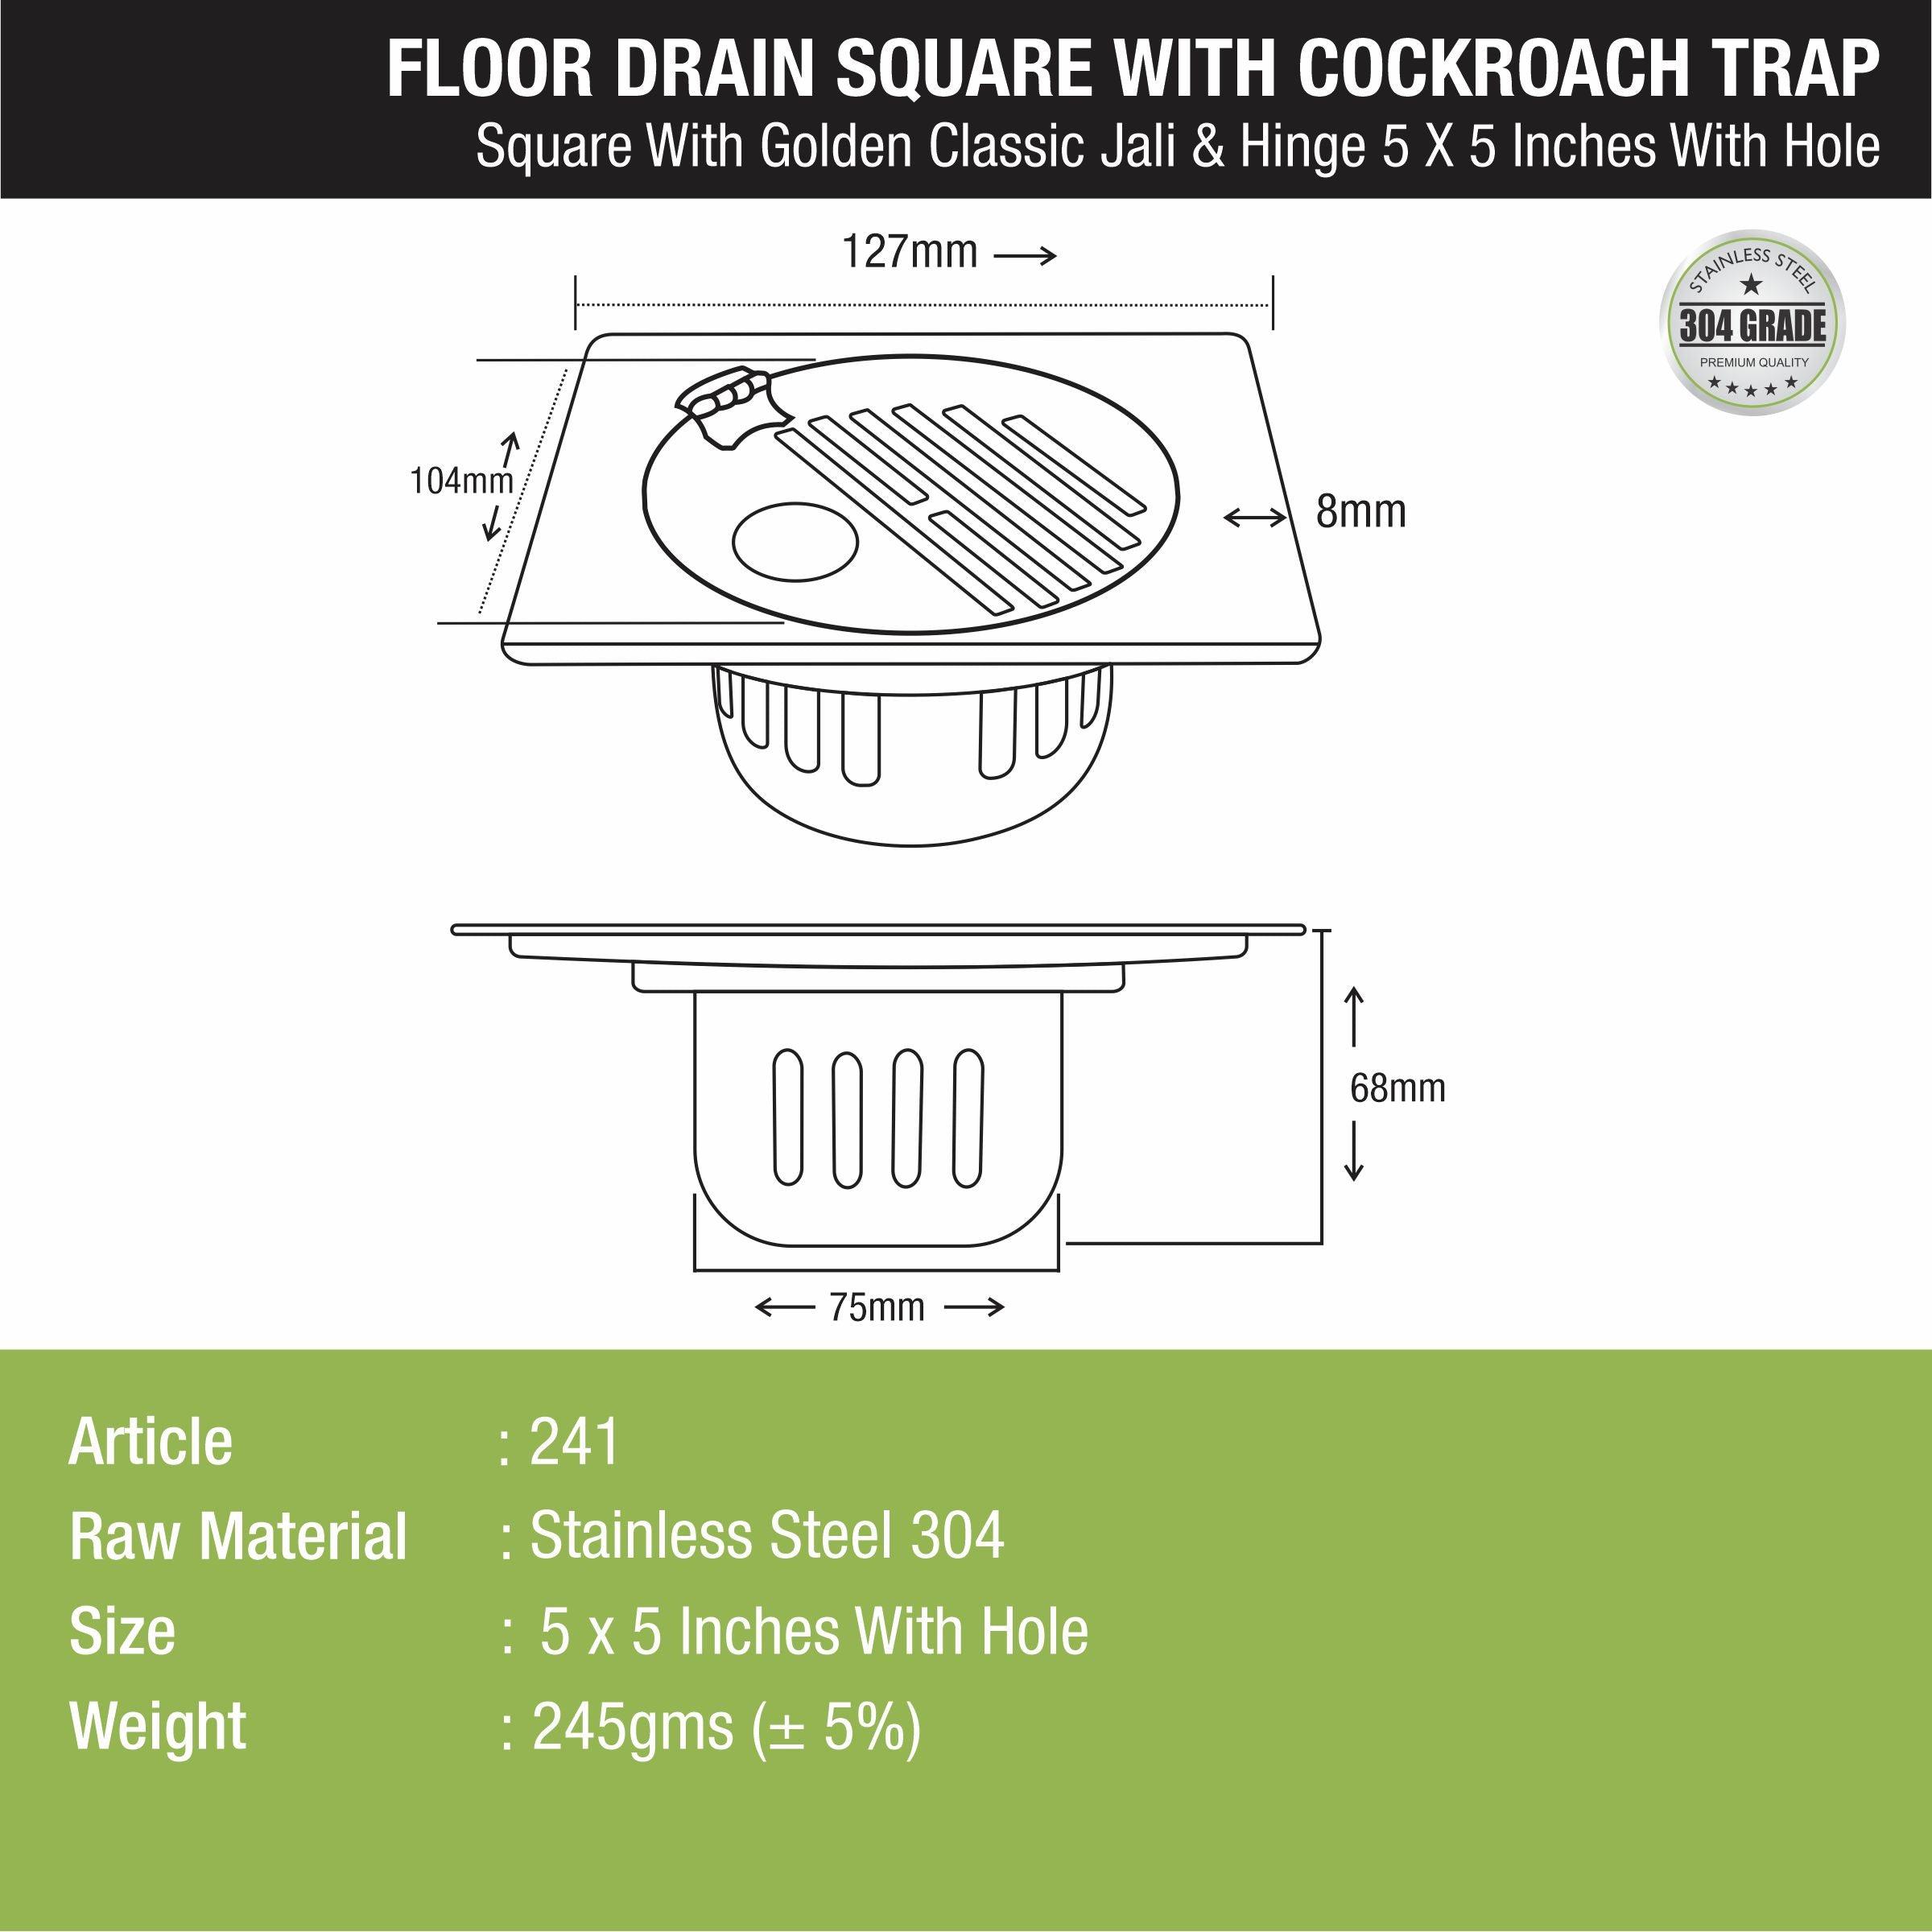 Golden Classic Jali Square Floor Drain (5 x 5 Inches) with Hinge, Hole and Cockroach Trap - LIPKA - Lipka Home